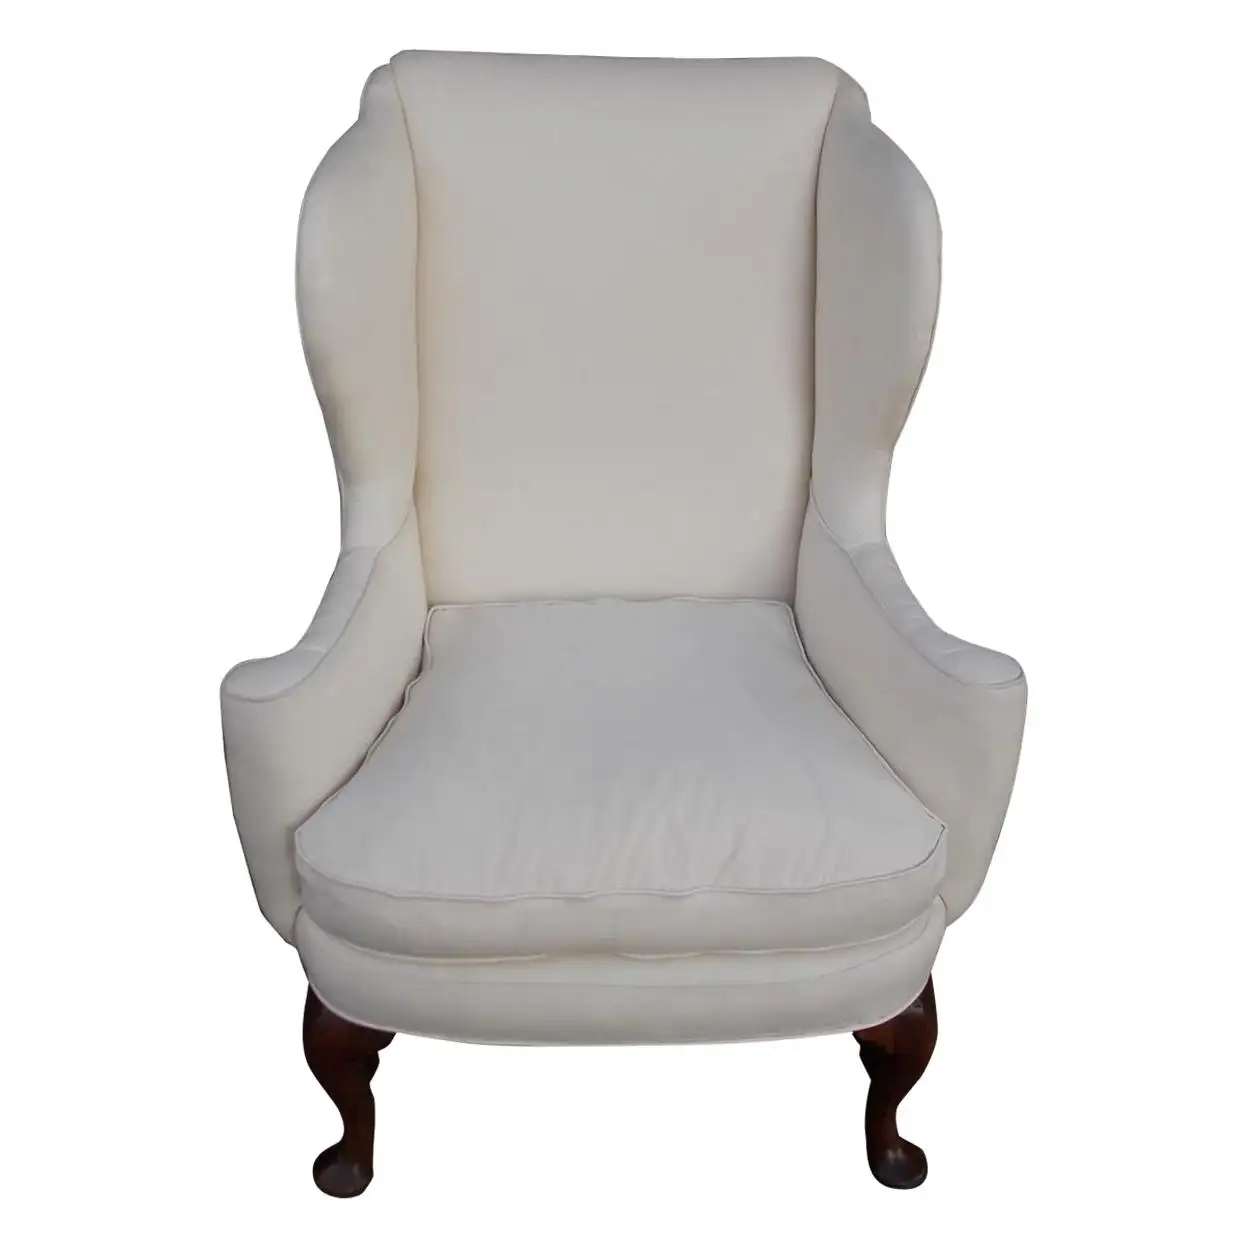 American Queen Anne Walnut Upholstered Wing Back Chair - Circa. 1740